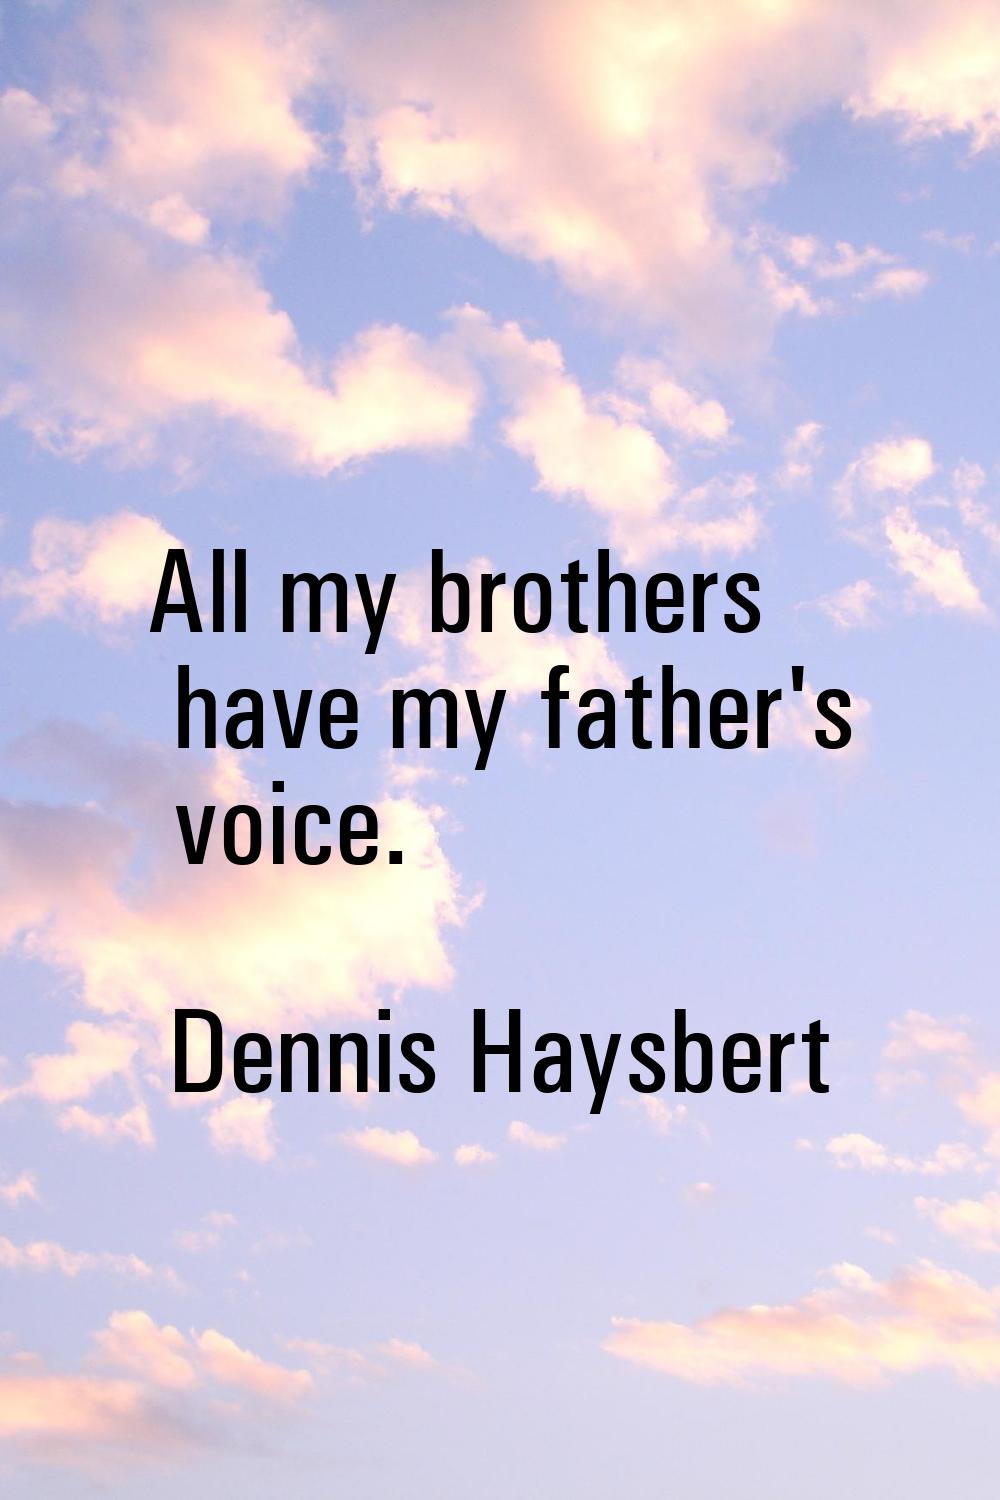 All my brothers have my father's voice.